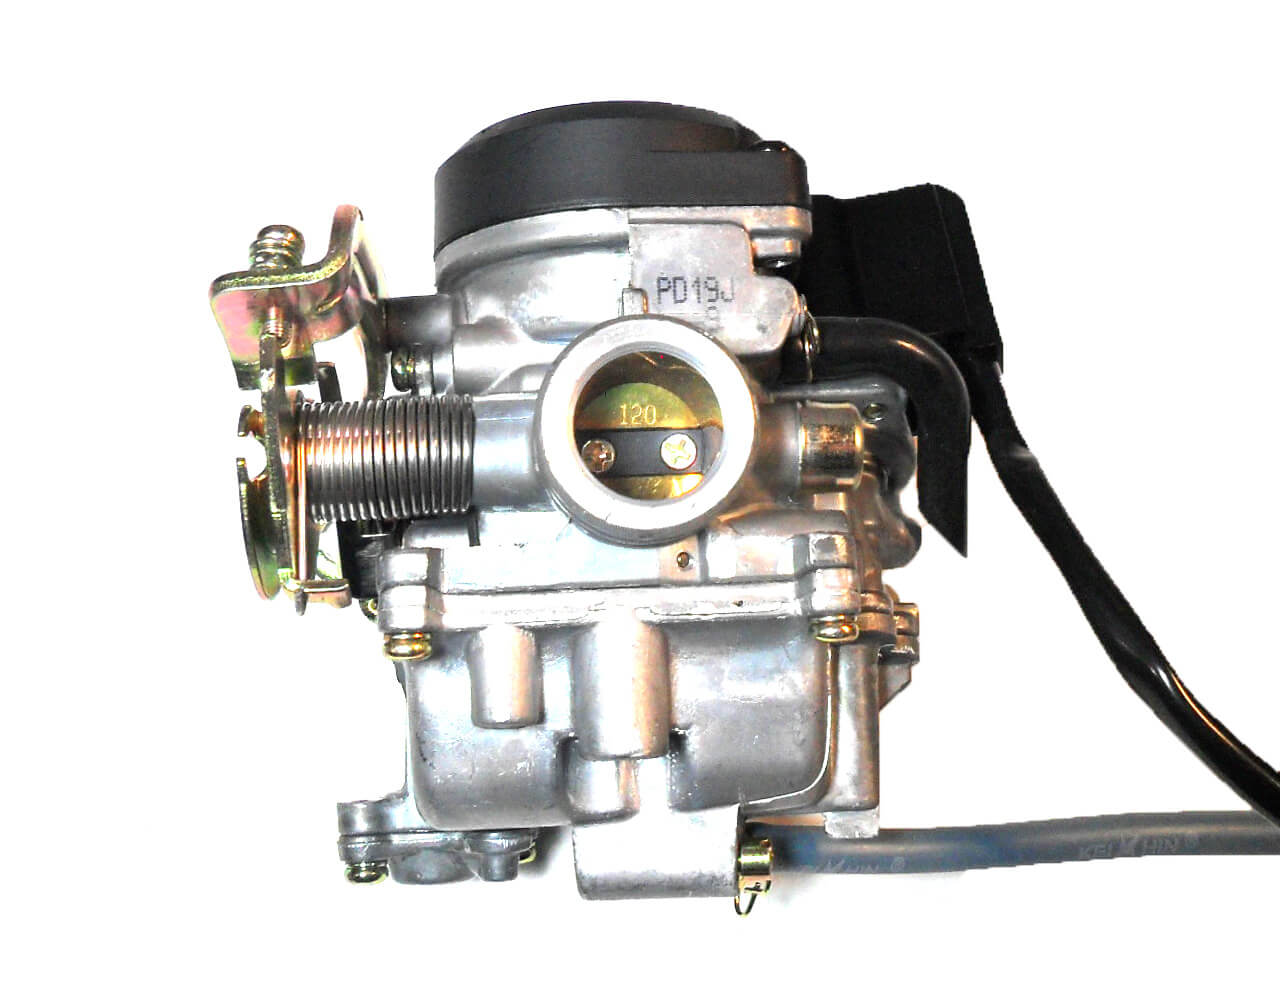 Runtong CVK PD19J Carburetor with booster pump Intake ID=19 OD=28 Air Box OD=40 Fits Most 49-100cc GY6 Belt Driven Scooters - Click Image to Close